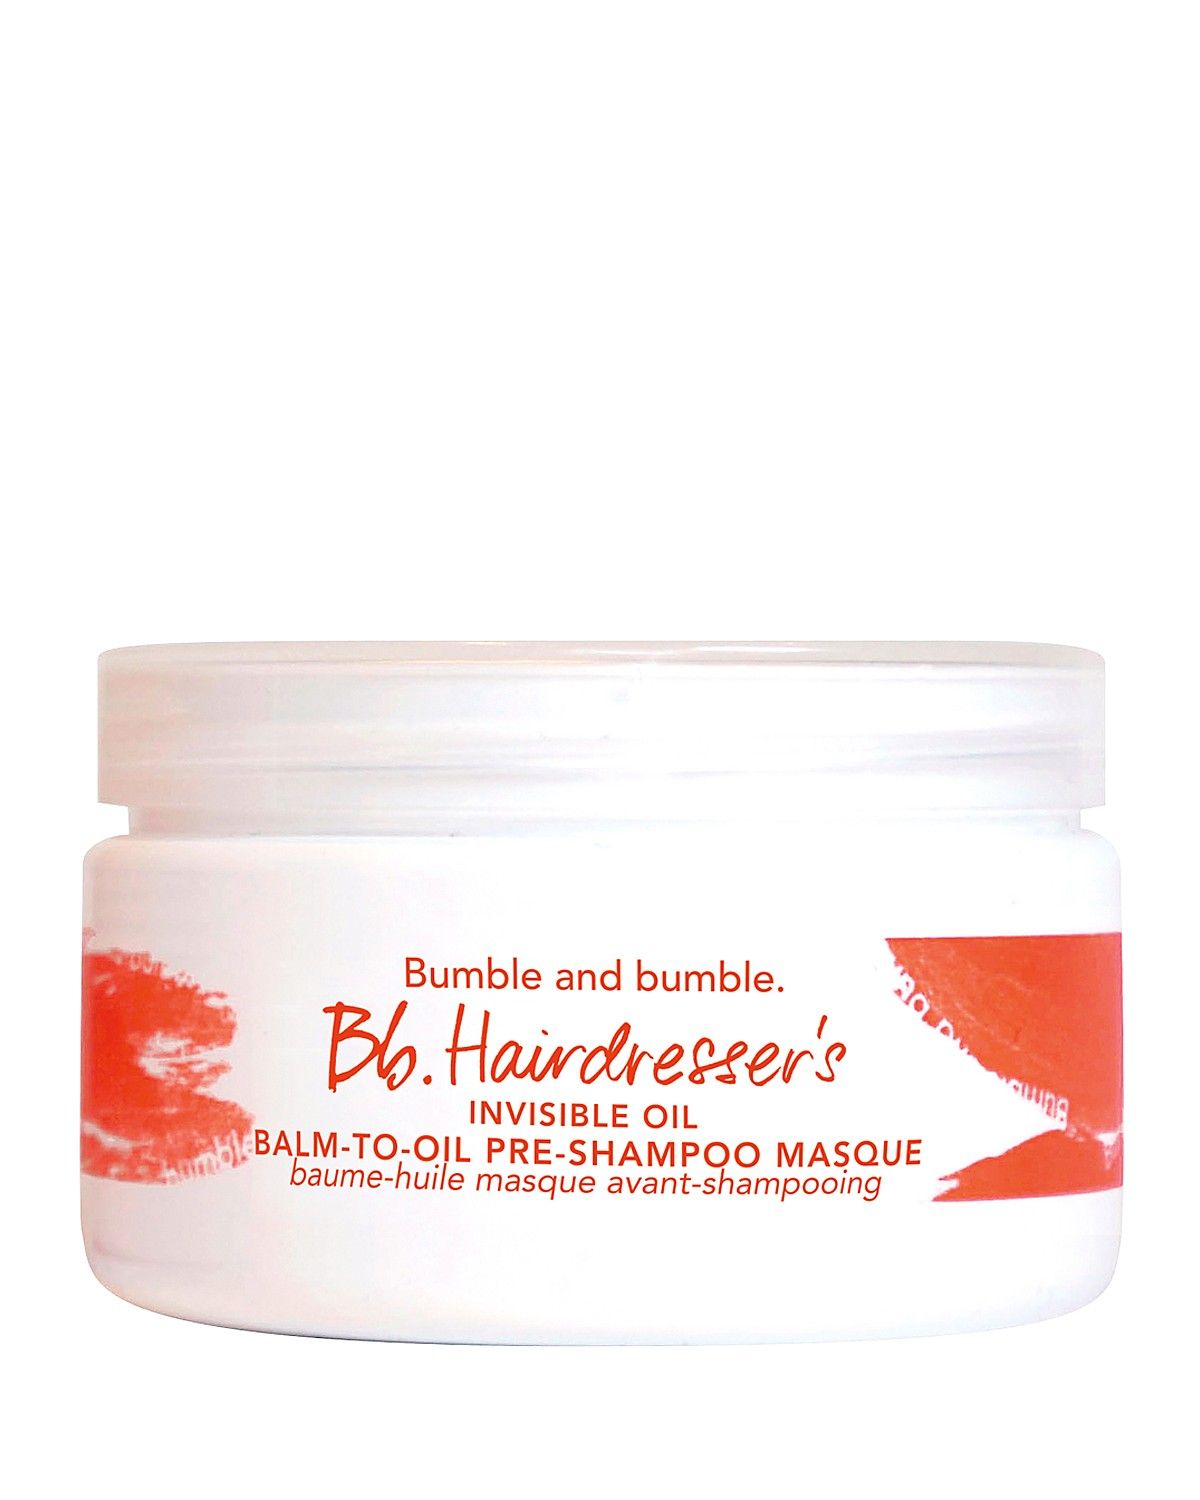 Hairdresser's Invisible Oil Balm-to-Oil Masque | and bumble